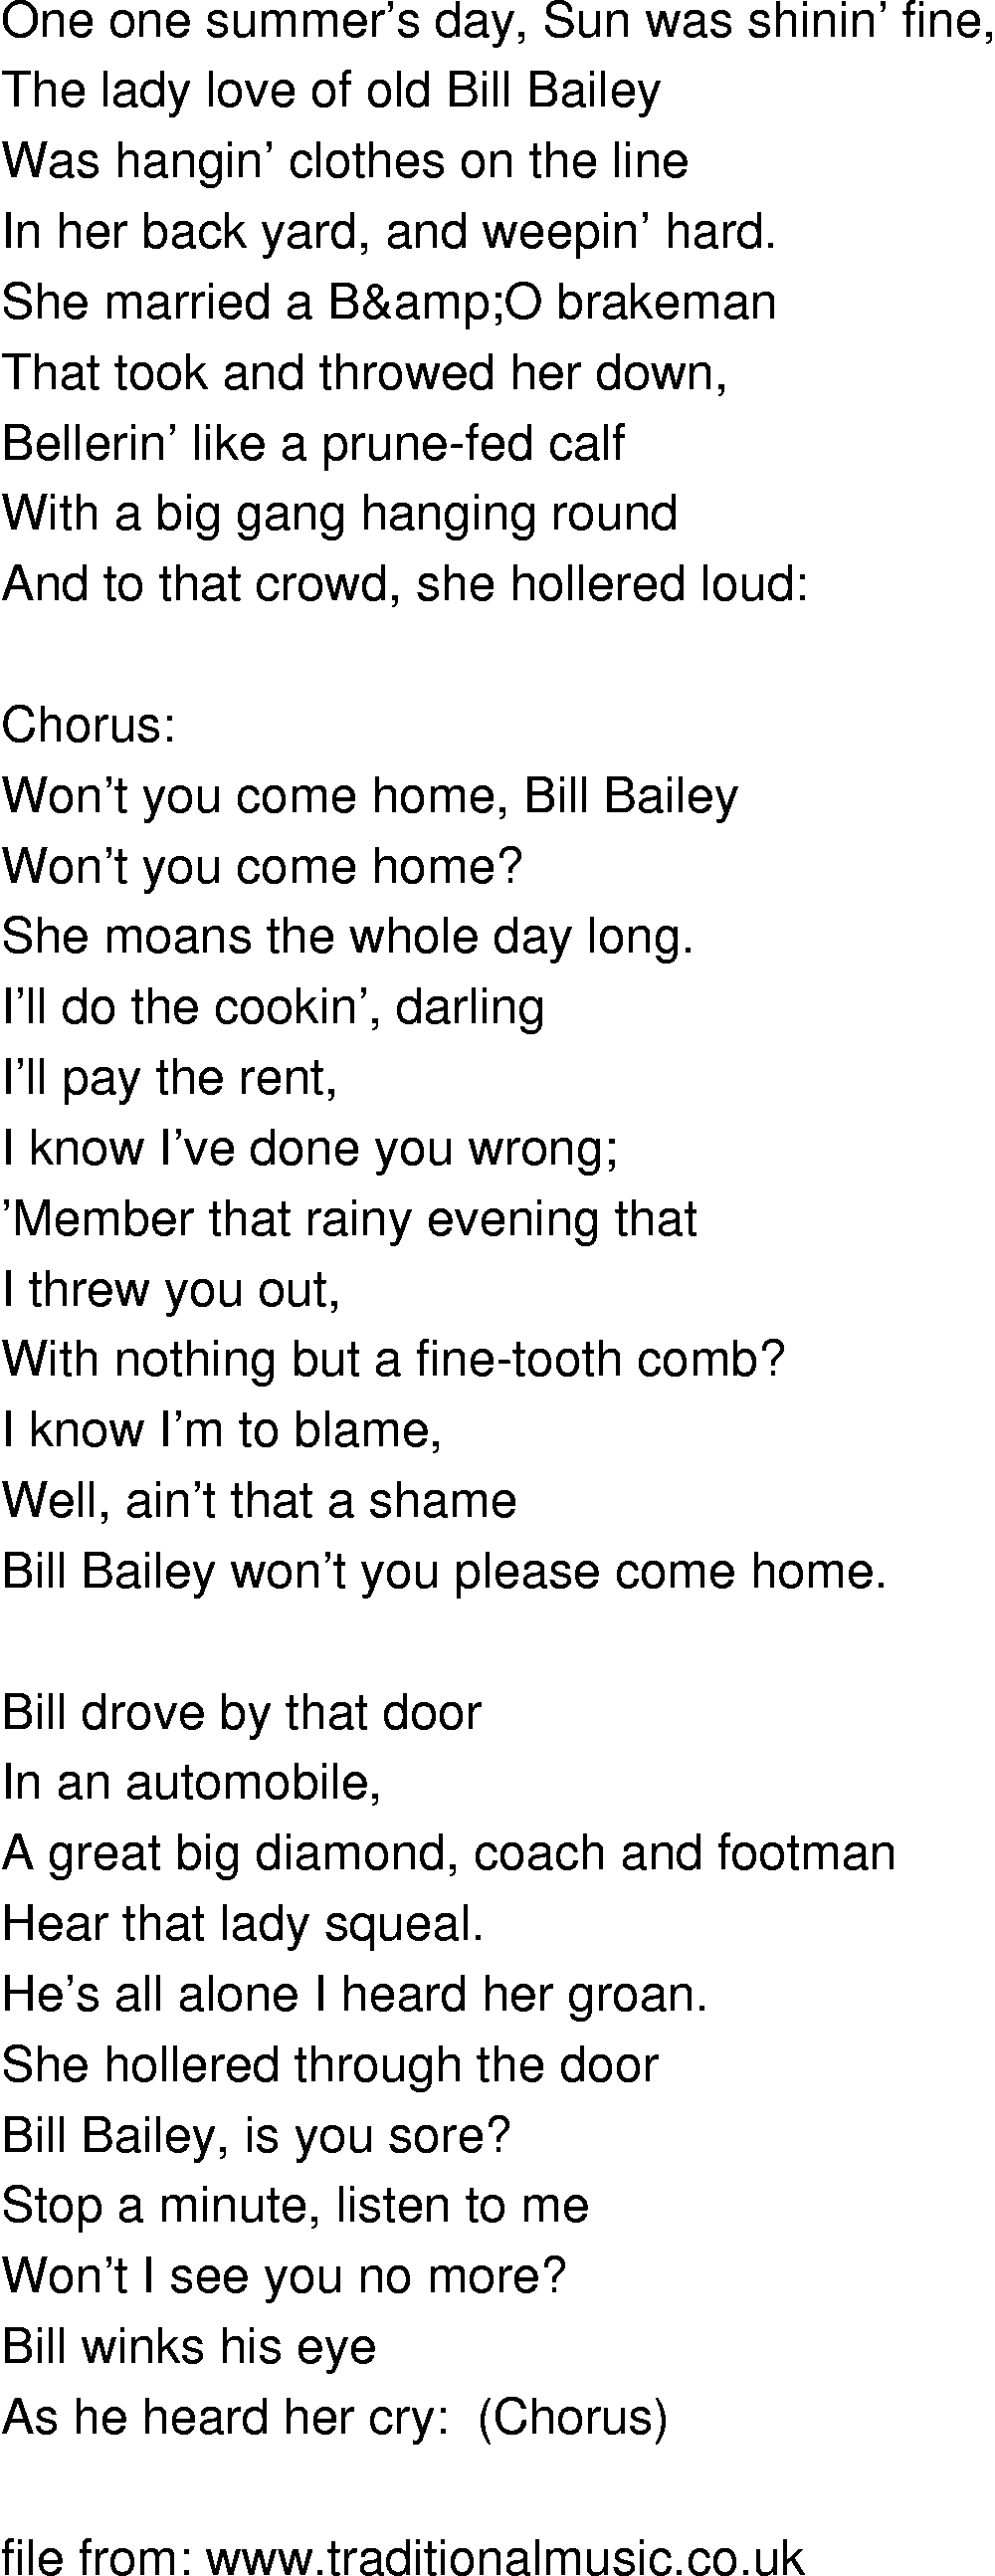 Old-Time (oldtimey) Song Lyrics - bill bailey wont you please come home